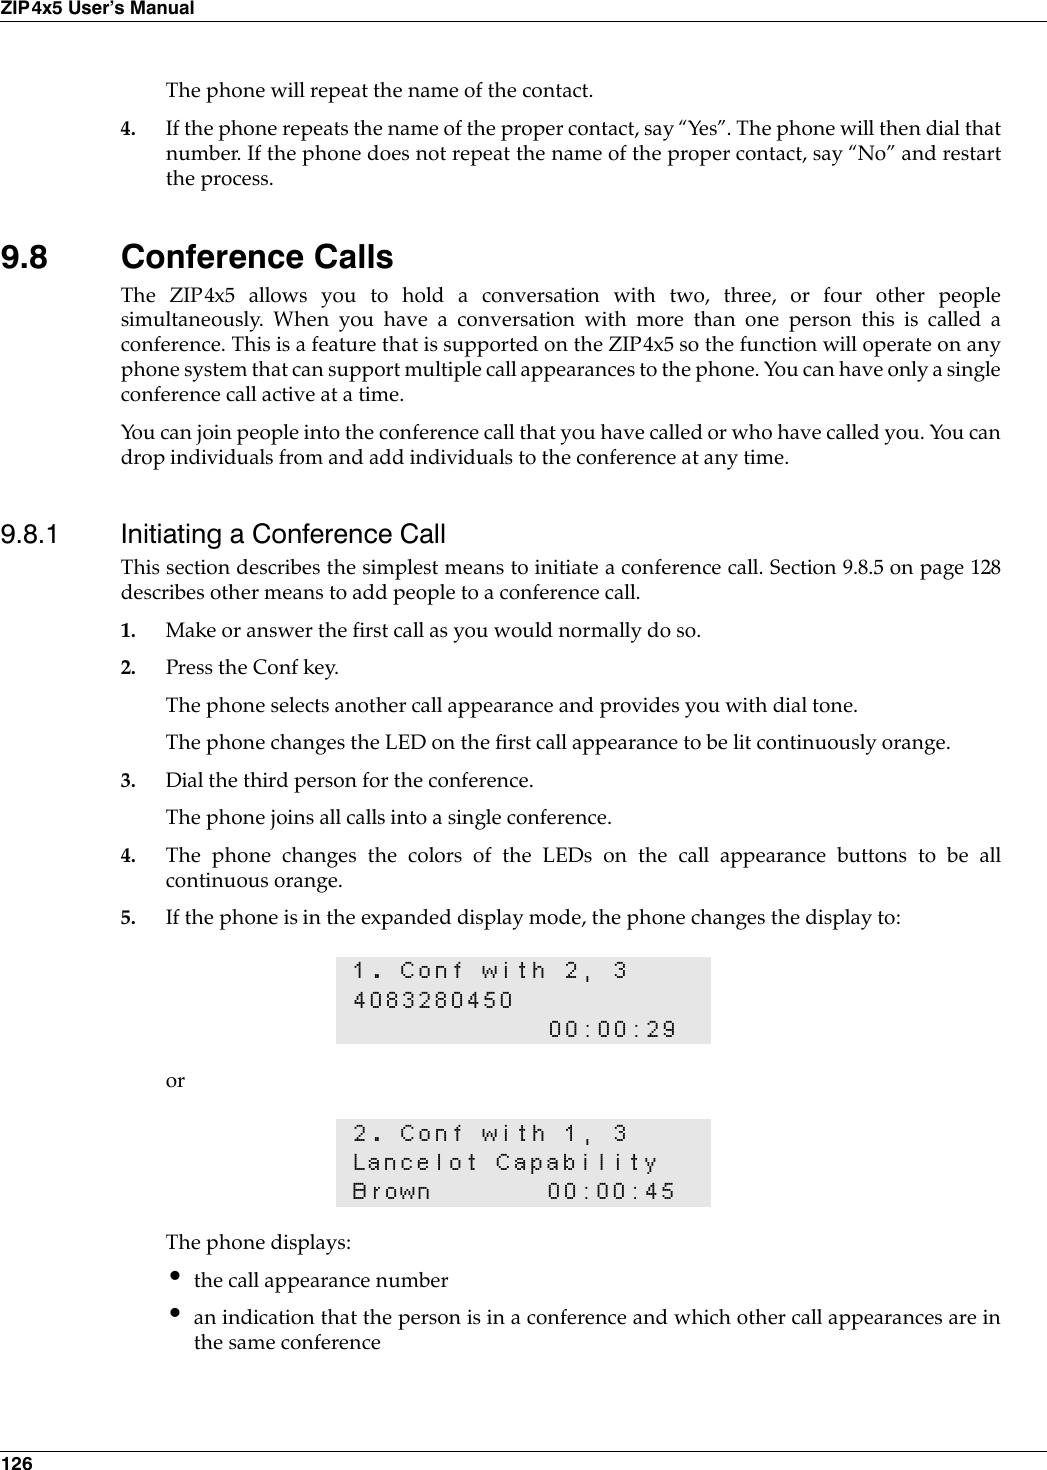 126ZIP4x5 User’s ManualThe phone will repeat the name of the contact.4. If the phone repeats the name of the proper contact, say “Yes”. The phone will then dial thatnumber. If the phone does not repeat the name of the proper contact, say “No” and restartthe process.9.8 Conference CallsThe ZIP4x5 allows you to hold a conversation with two, three, or four other peoplesimultaneously. When you have a conversation with more than one person this is called aconference. This is a feature that is supported on the ZIP4x5 so the function will operate on anyphone system that can support multiple call appearances to the phone. You can have only a singleconference call active at a time.You can join people into the conference call that you have called or who have called you. You candrop individuals from and add individuals to the conference at any time.9.8.1 Initiating a Conference CallThis section describes the simplest means to initiate a conference call. Section 9.8.5 on page 128describes other means to add people to a conference call.1. Make or answer the first call as you would normally do so.2. Press the Conf key.The phone selects another call appearance and provides you with dial tone.The phone changes the LED on the first call appearance to be lit continuously orange.3. Dial the third person for the conference.The phone joins all calls into a single conference.4. The phone changes the colors of the LEDs on the call appearance buttons to be allcontinuous orange.5. If the phone is in the expanded display mode, the phone changes the display to:orThe phone displays:•the call appearance number•an indication that the person is in a conference and which other call appearances are inthe same conference1. Conf with 2, 3408328045000:00:292. Conf with 1, 3Lancelot CapabilityBrown 00:00:45